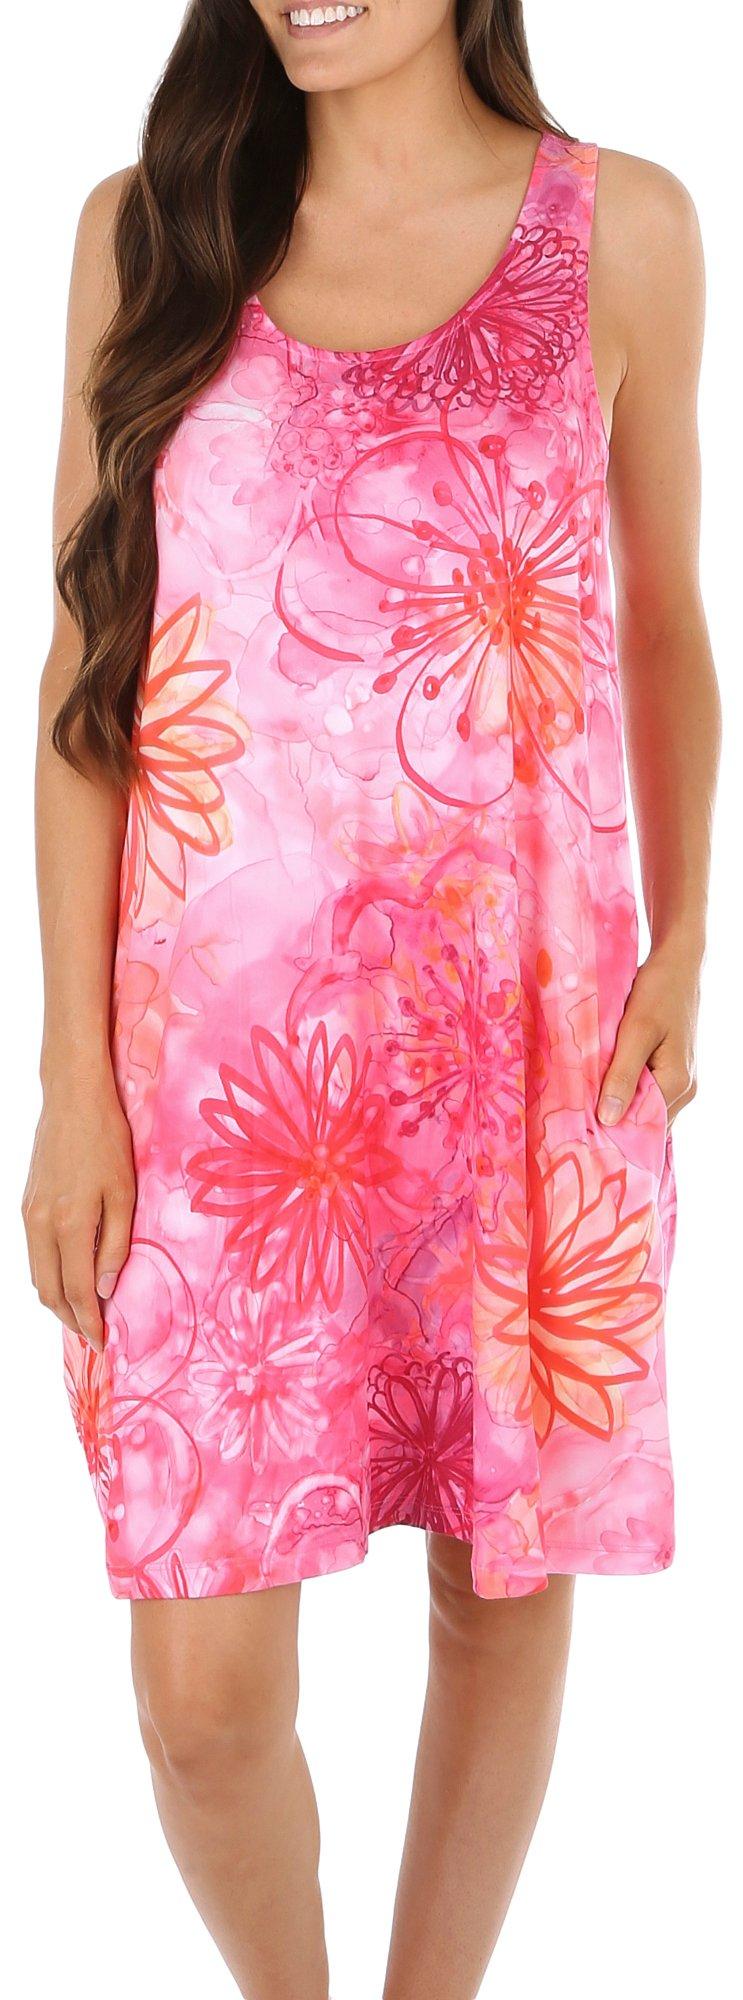 Womens Watercolor Floral Sleeveless Dress